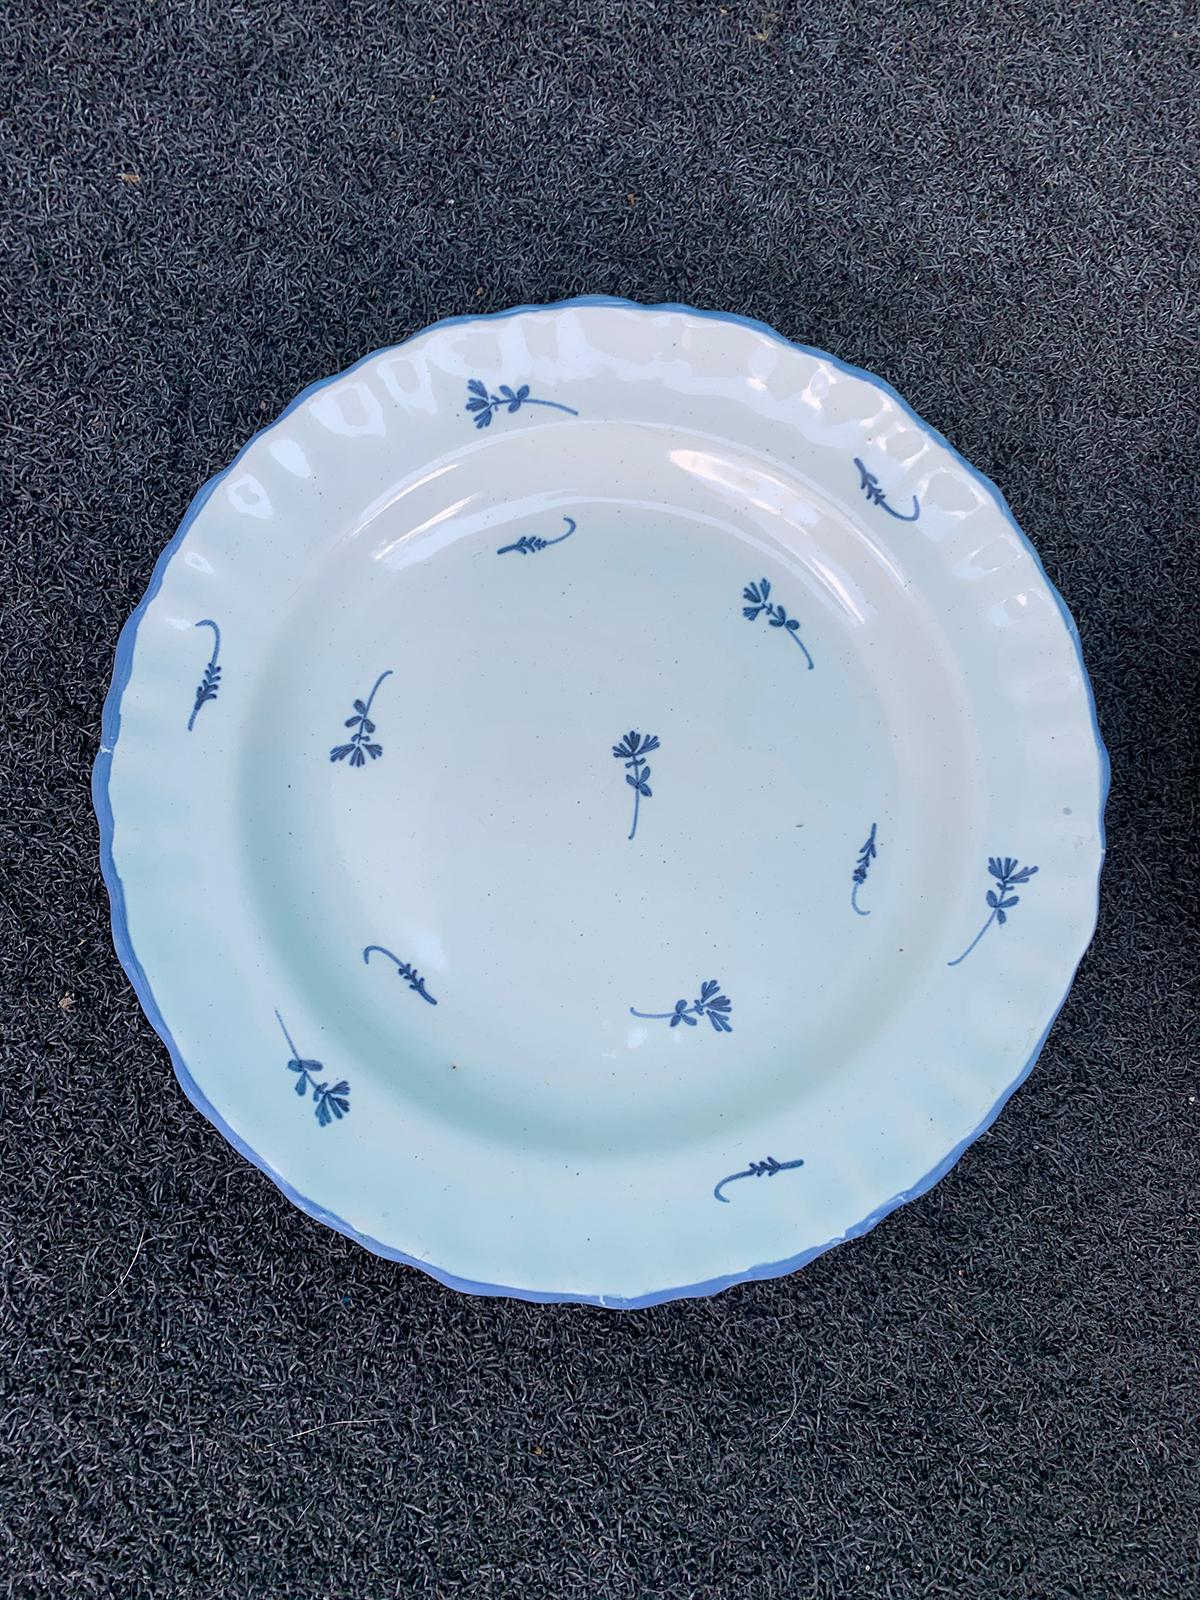 Pair of 20th Century French Faience Porcelain Plates For Sale 5